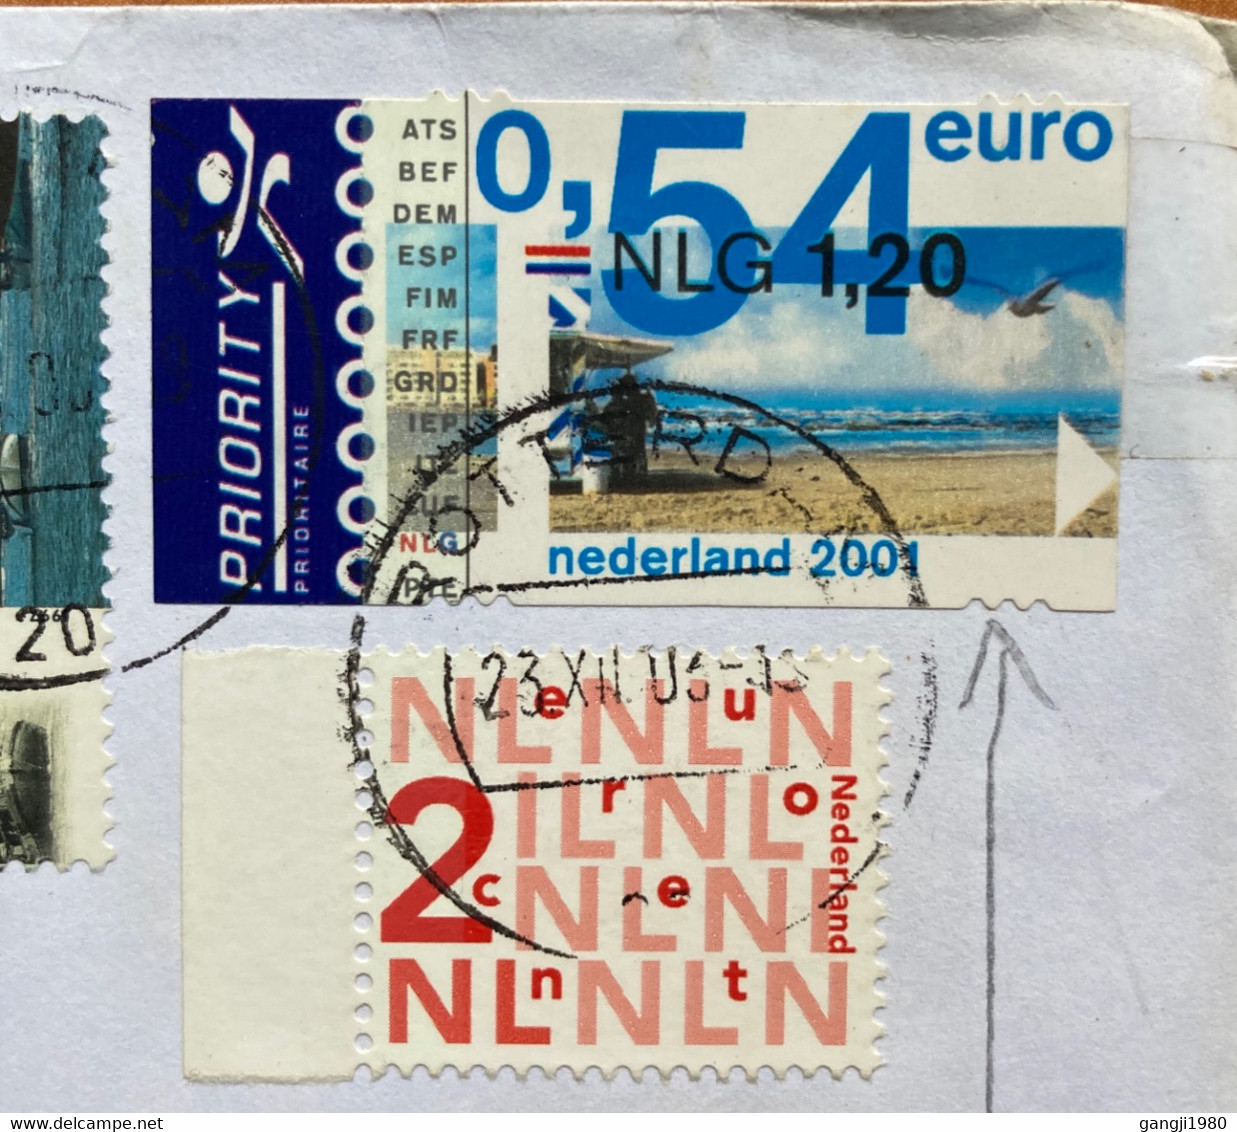 NEDERLAND 2004, PRIORITY SELF-ADHESIVE ATM STAMP ,5 VIEW OF SEA & CITY SHIP COVER TO LITHUANIA - Covers & Documents